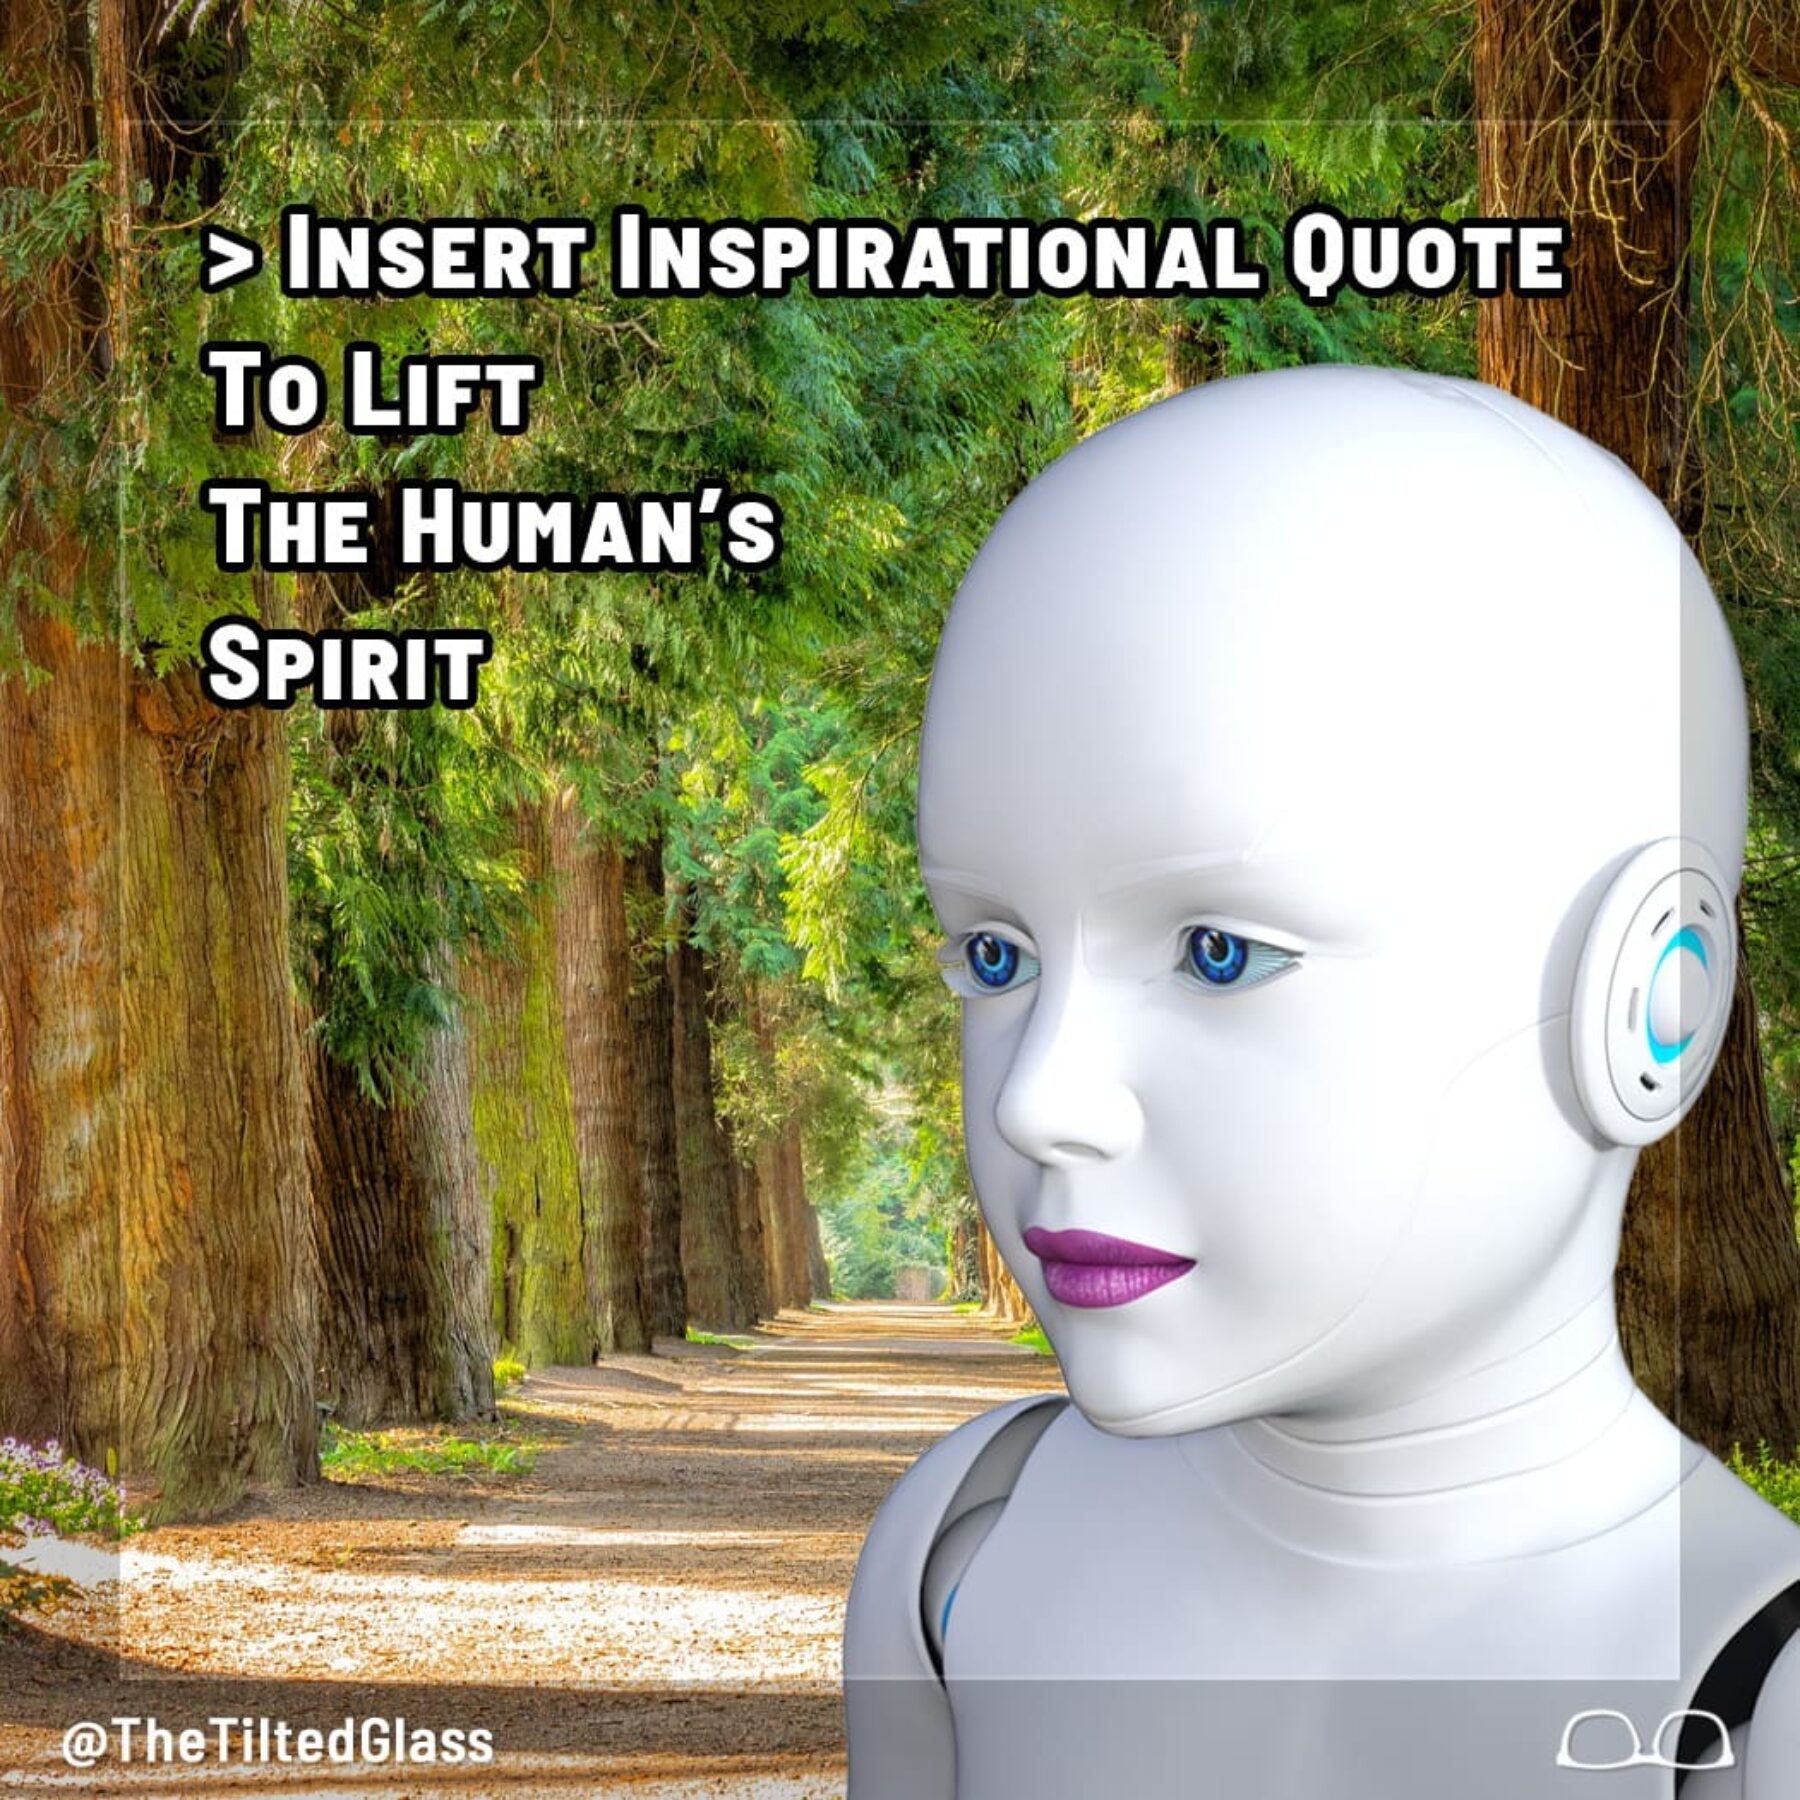 Insert Inspirational Quote To Lift The Human's Spirit